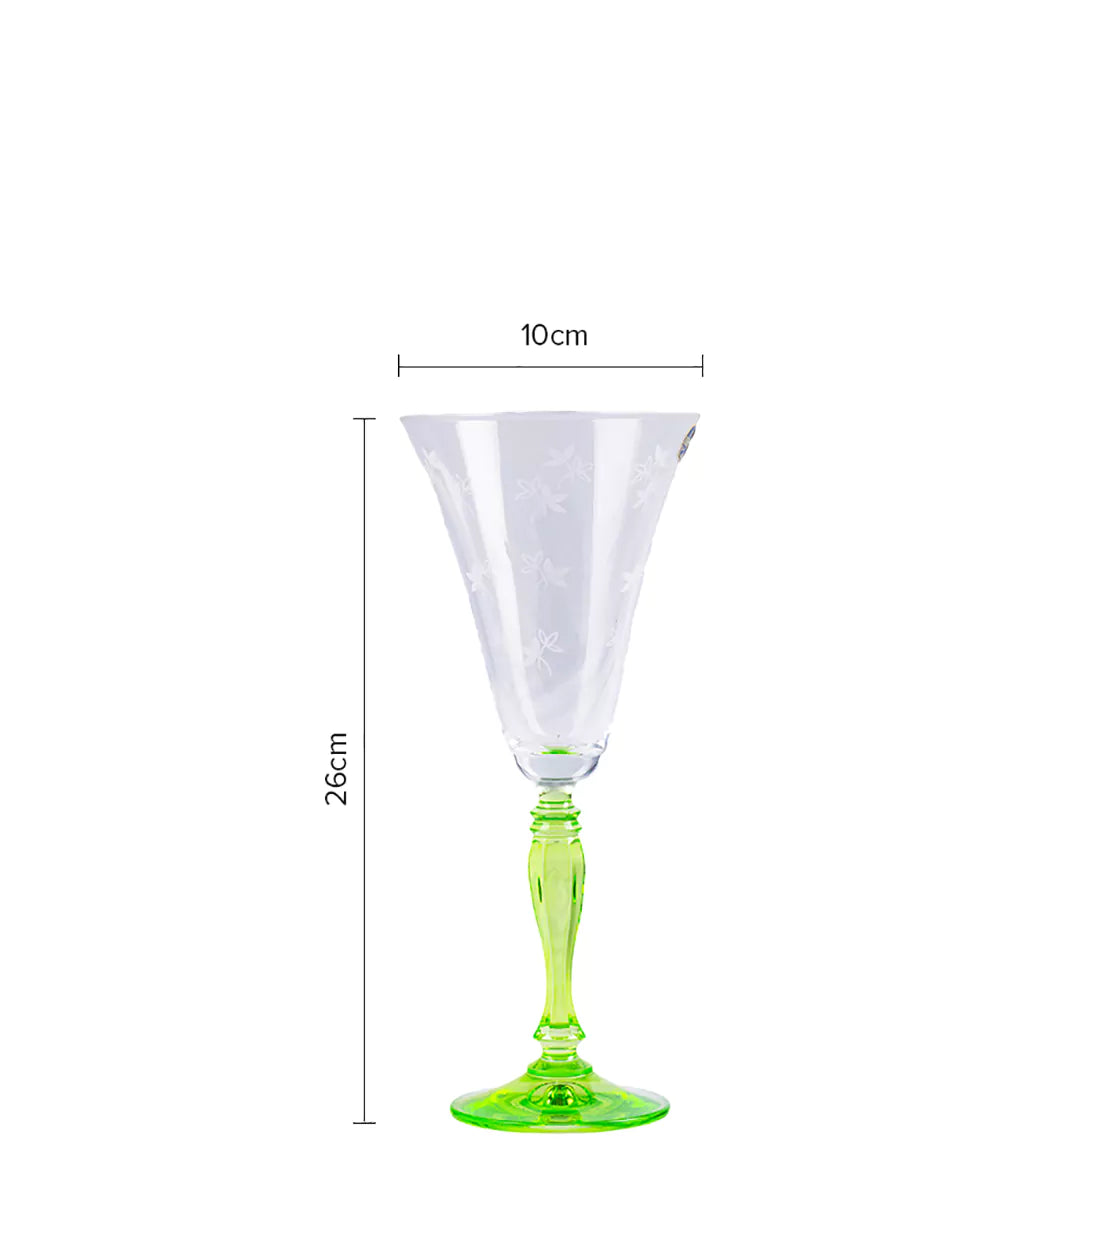 CAESAR CRYSTAL BOHEMIAE - Bell Shaped Crystal Cut Glass in Green Color - Bespoke Cocktail Green Flute Glass with Fine Detailing.